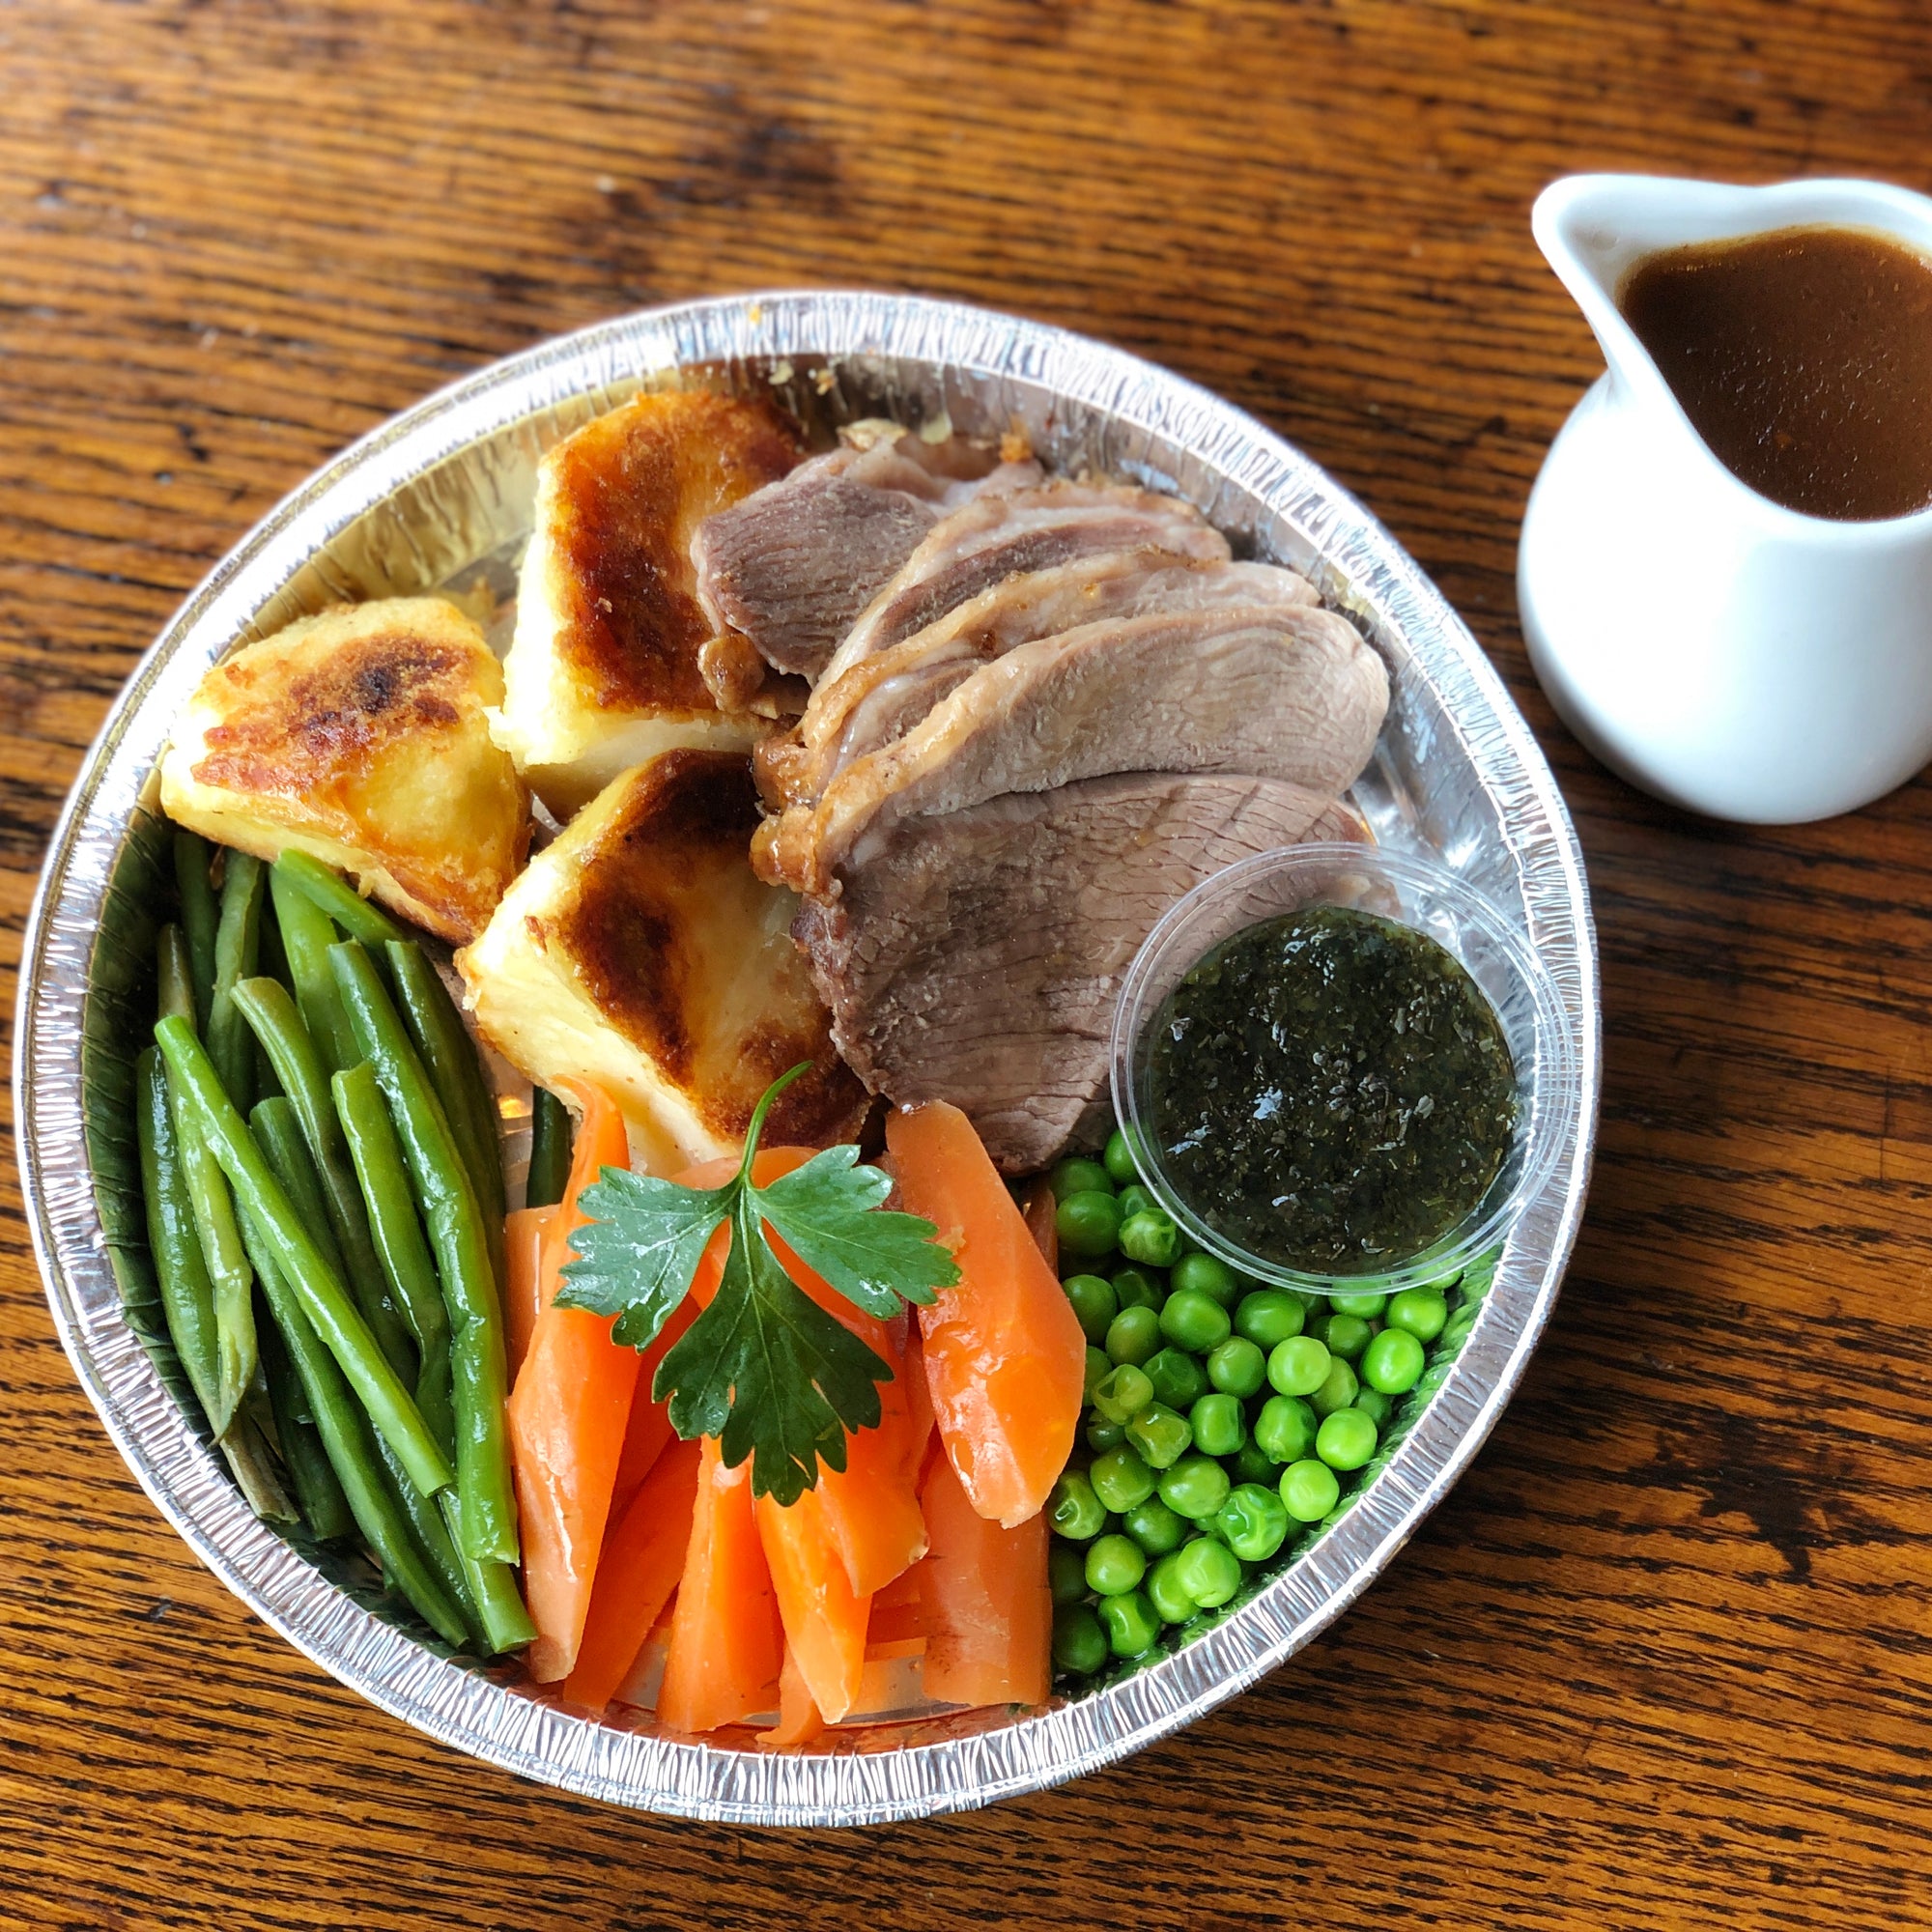 Weekend Roast Lunch ‘At Home’